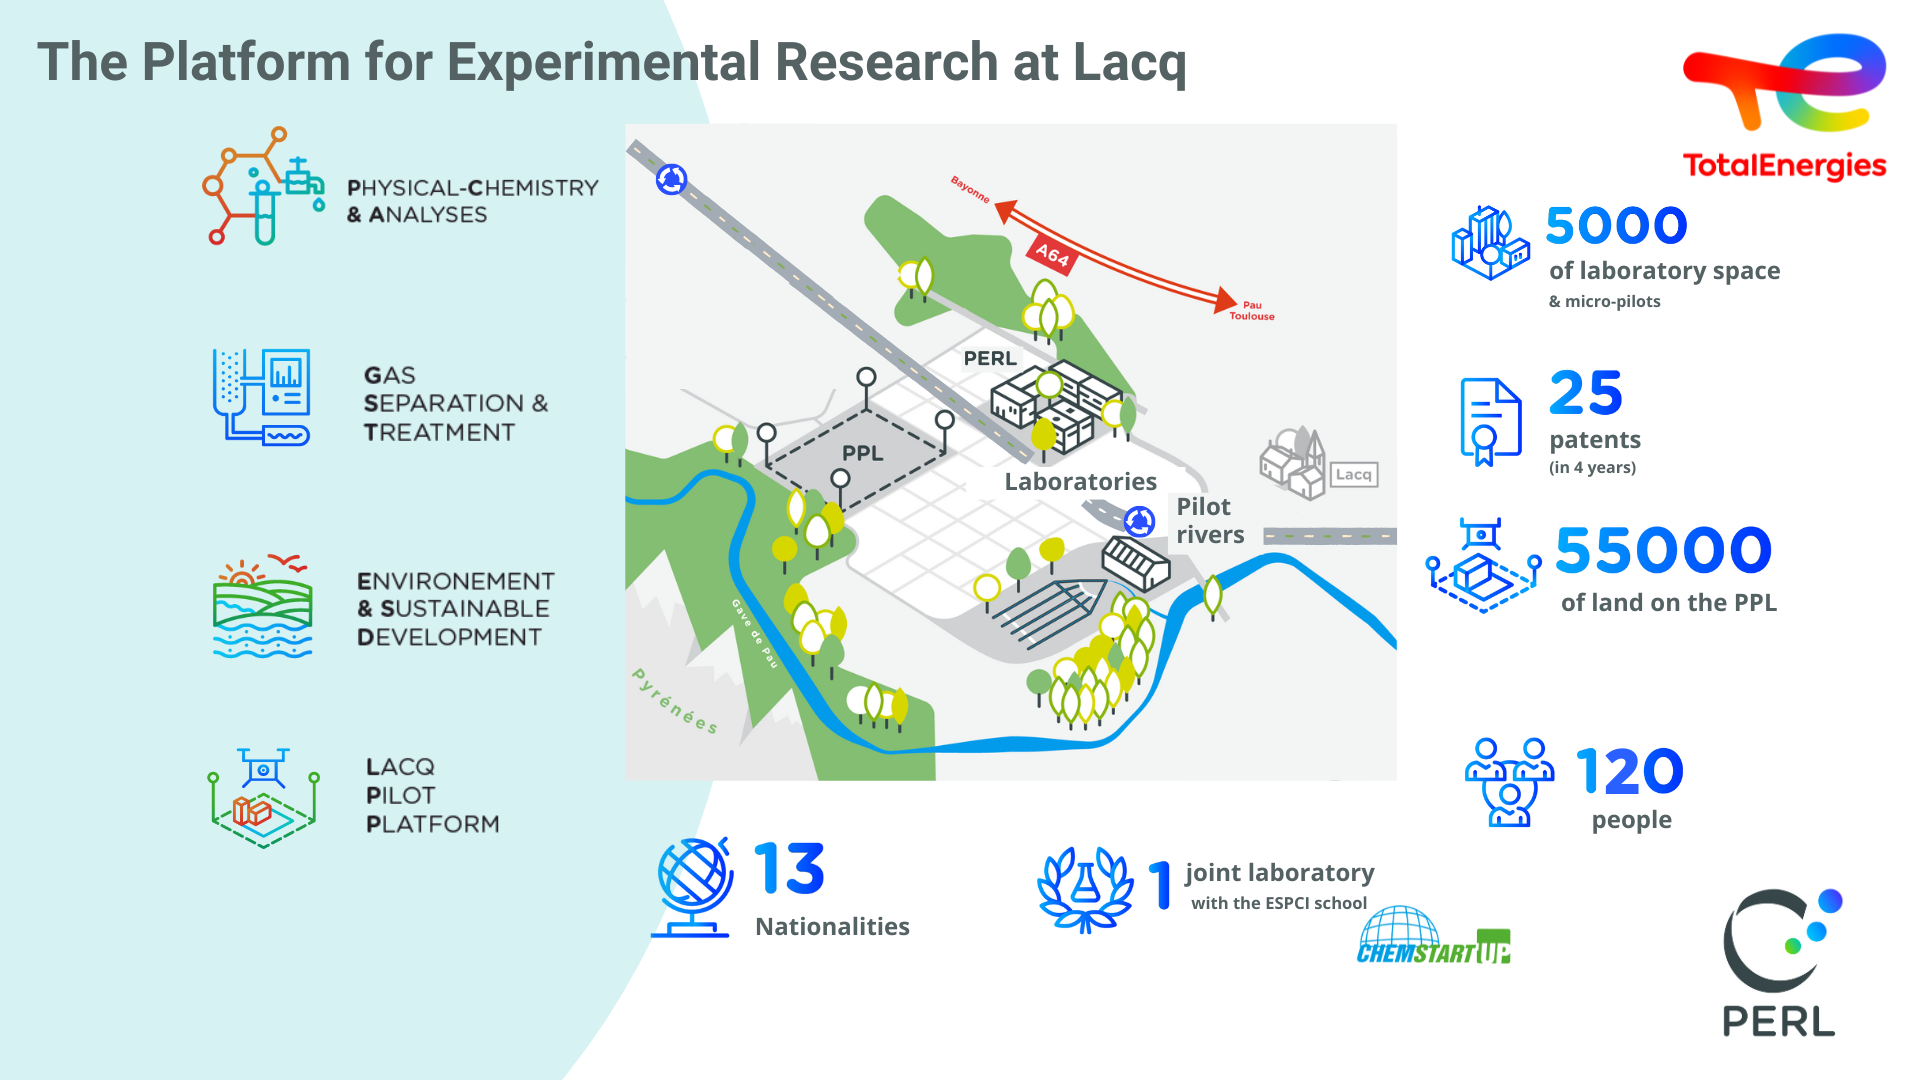 Infographics « The Platform for Experimental Research at Lacq » - see detailed description hereafter